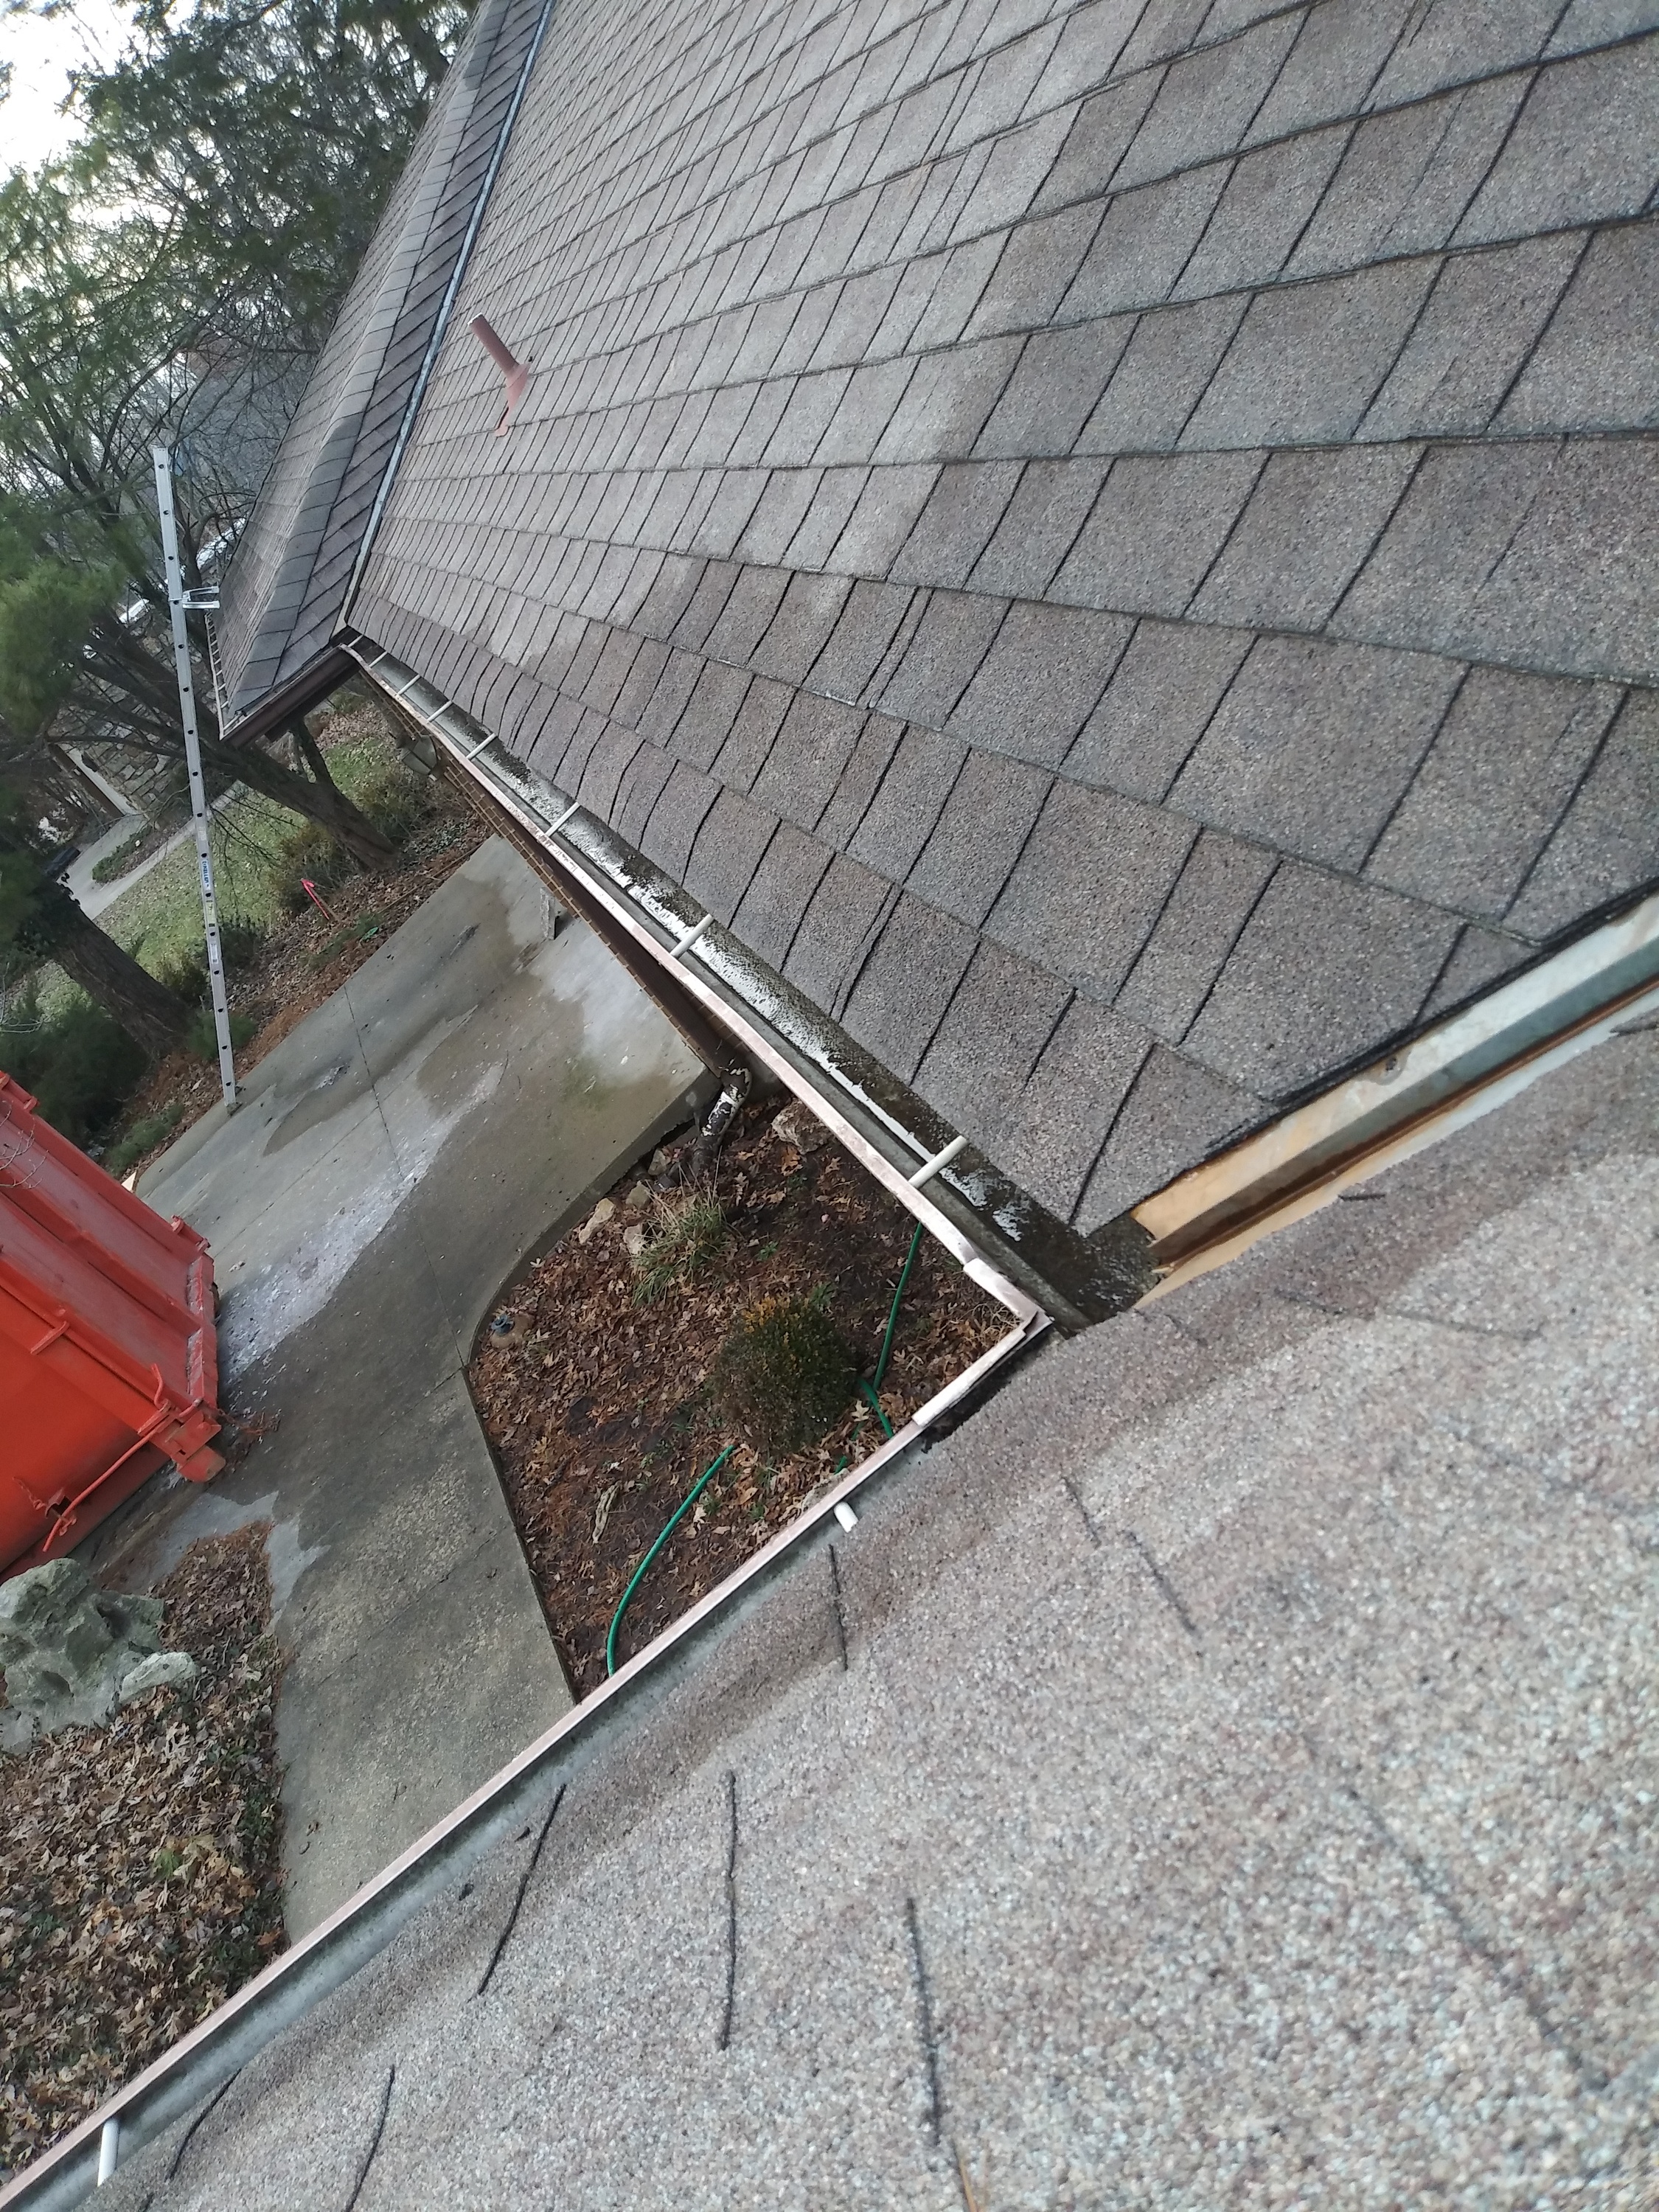 Clean Pro Gutter Cleaning Baton Rouge